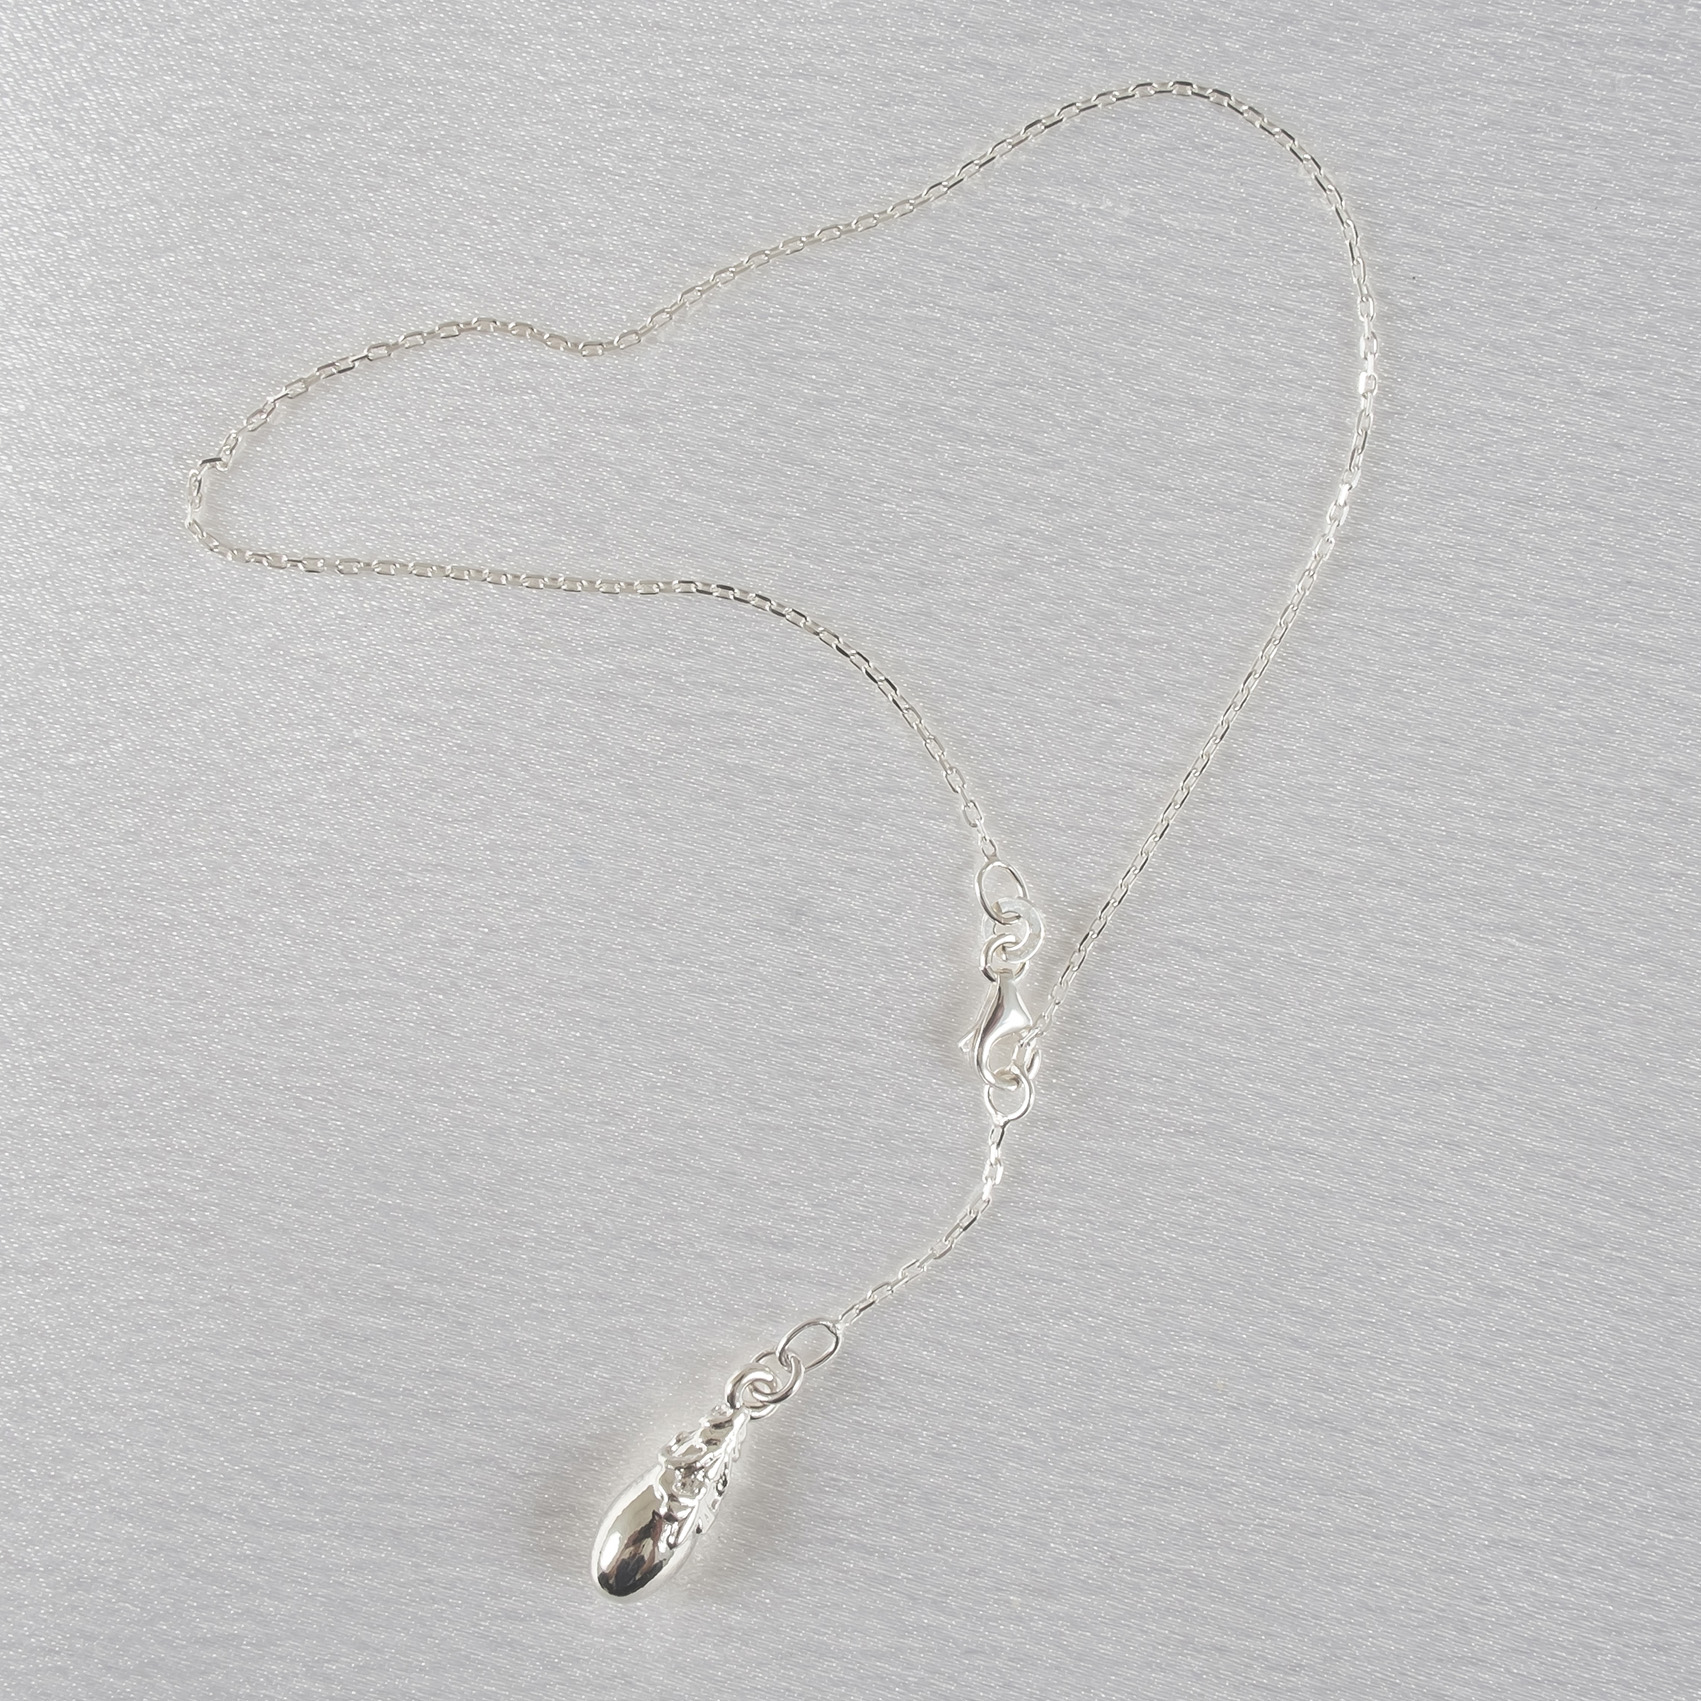 CHC54 Silver Wrist or Ankle Chain with Teardrop Pendant